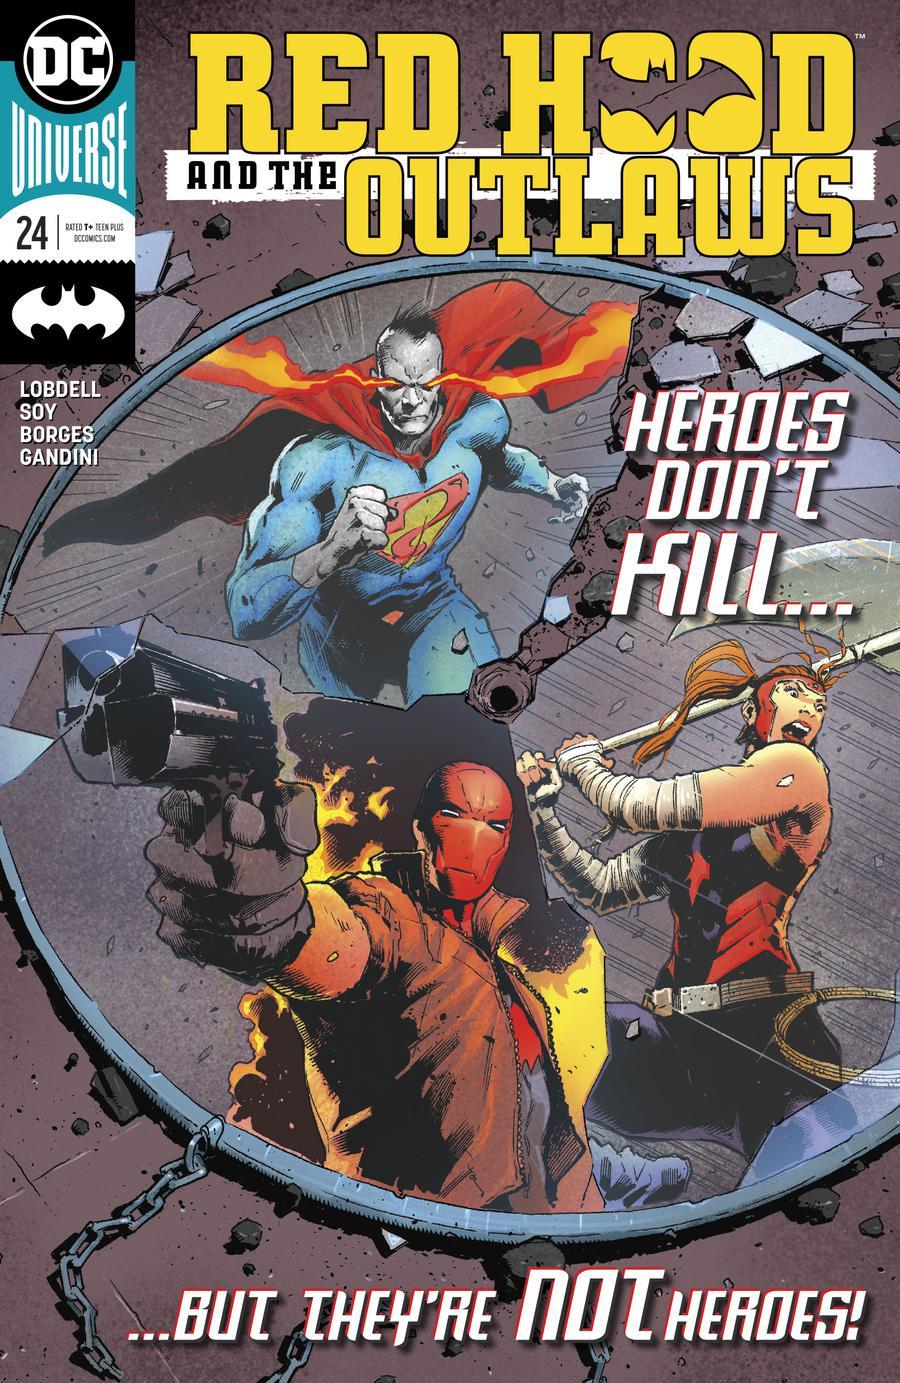 Red Hood and the Outlaws Vol. 2 #24